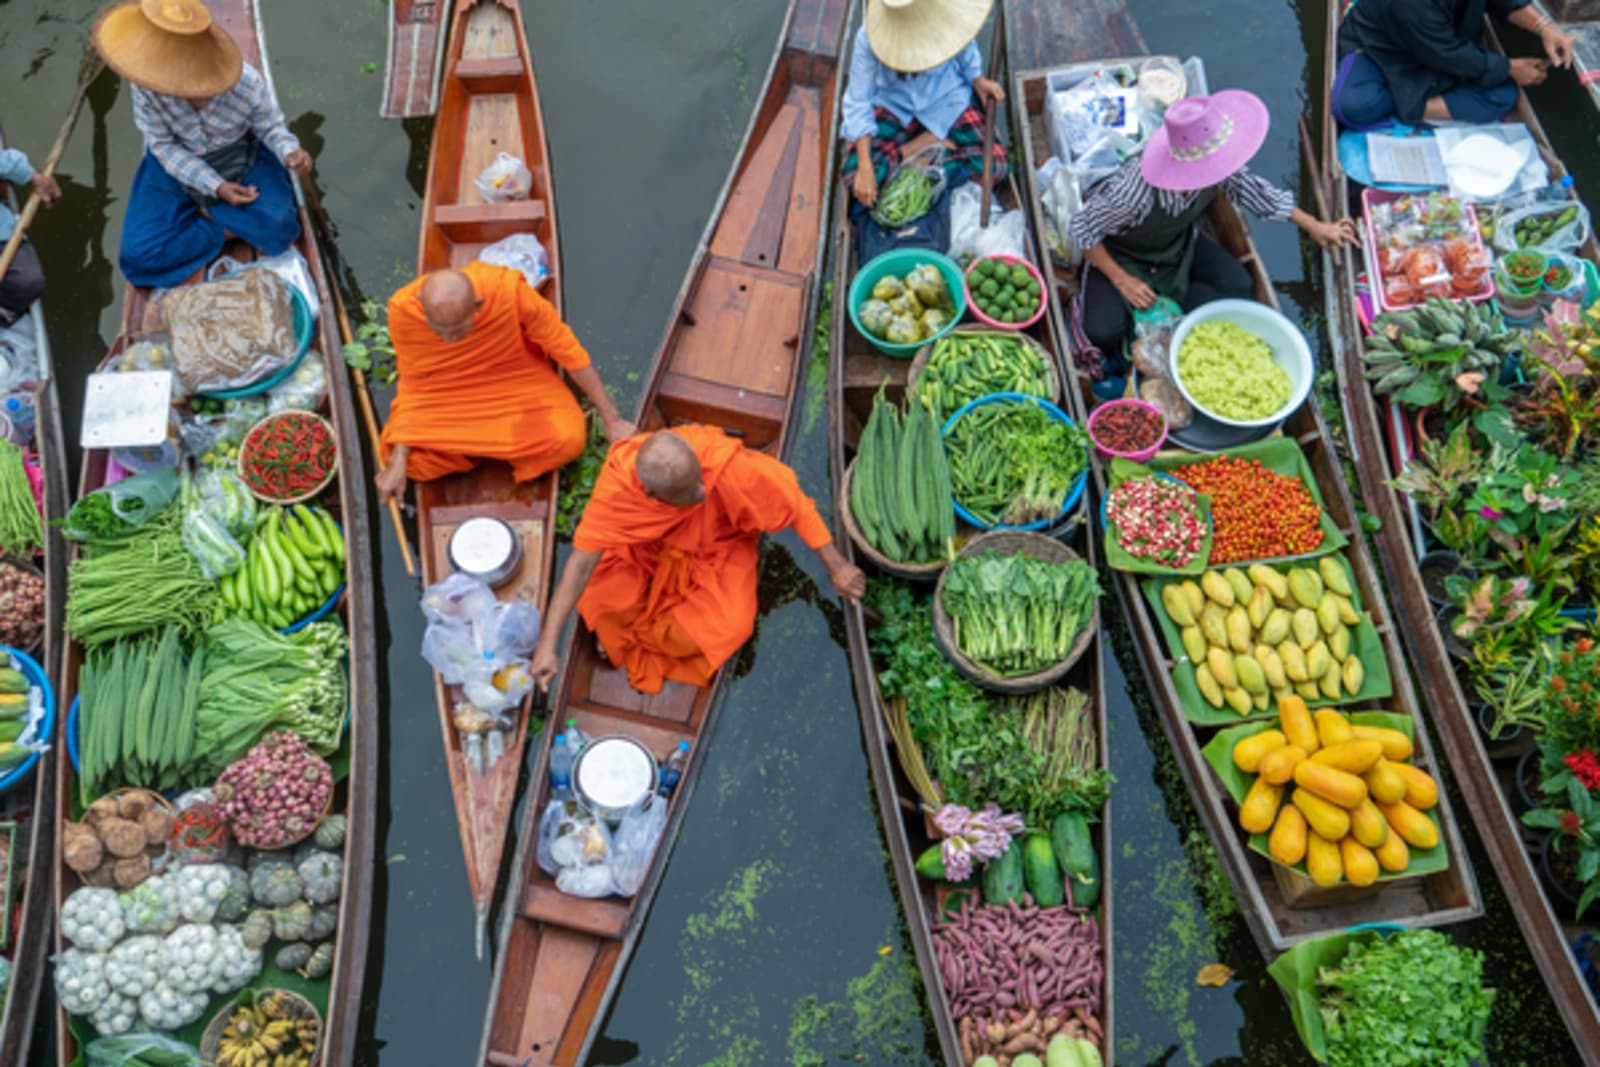 boats full of food and vegetables floating on water in thailand